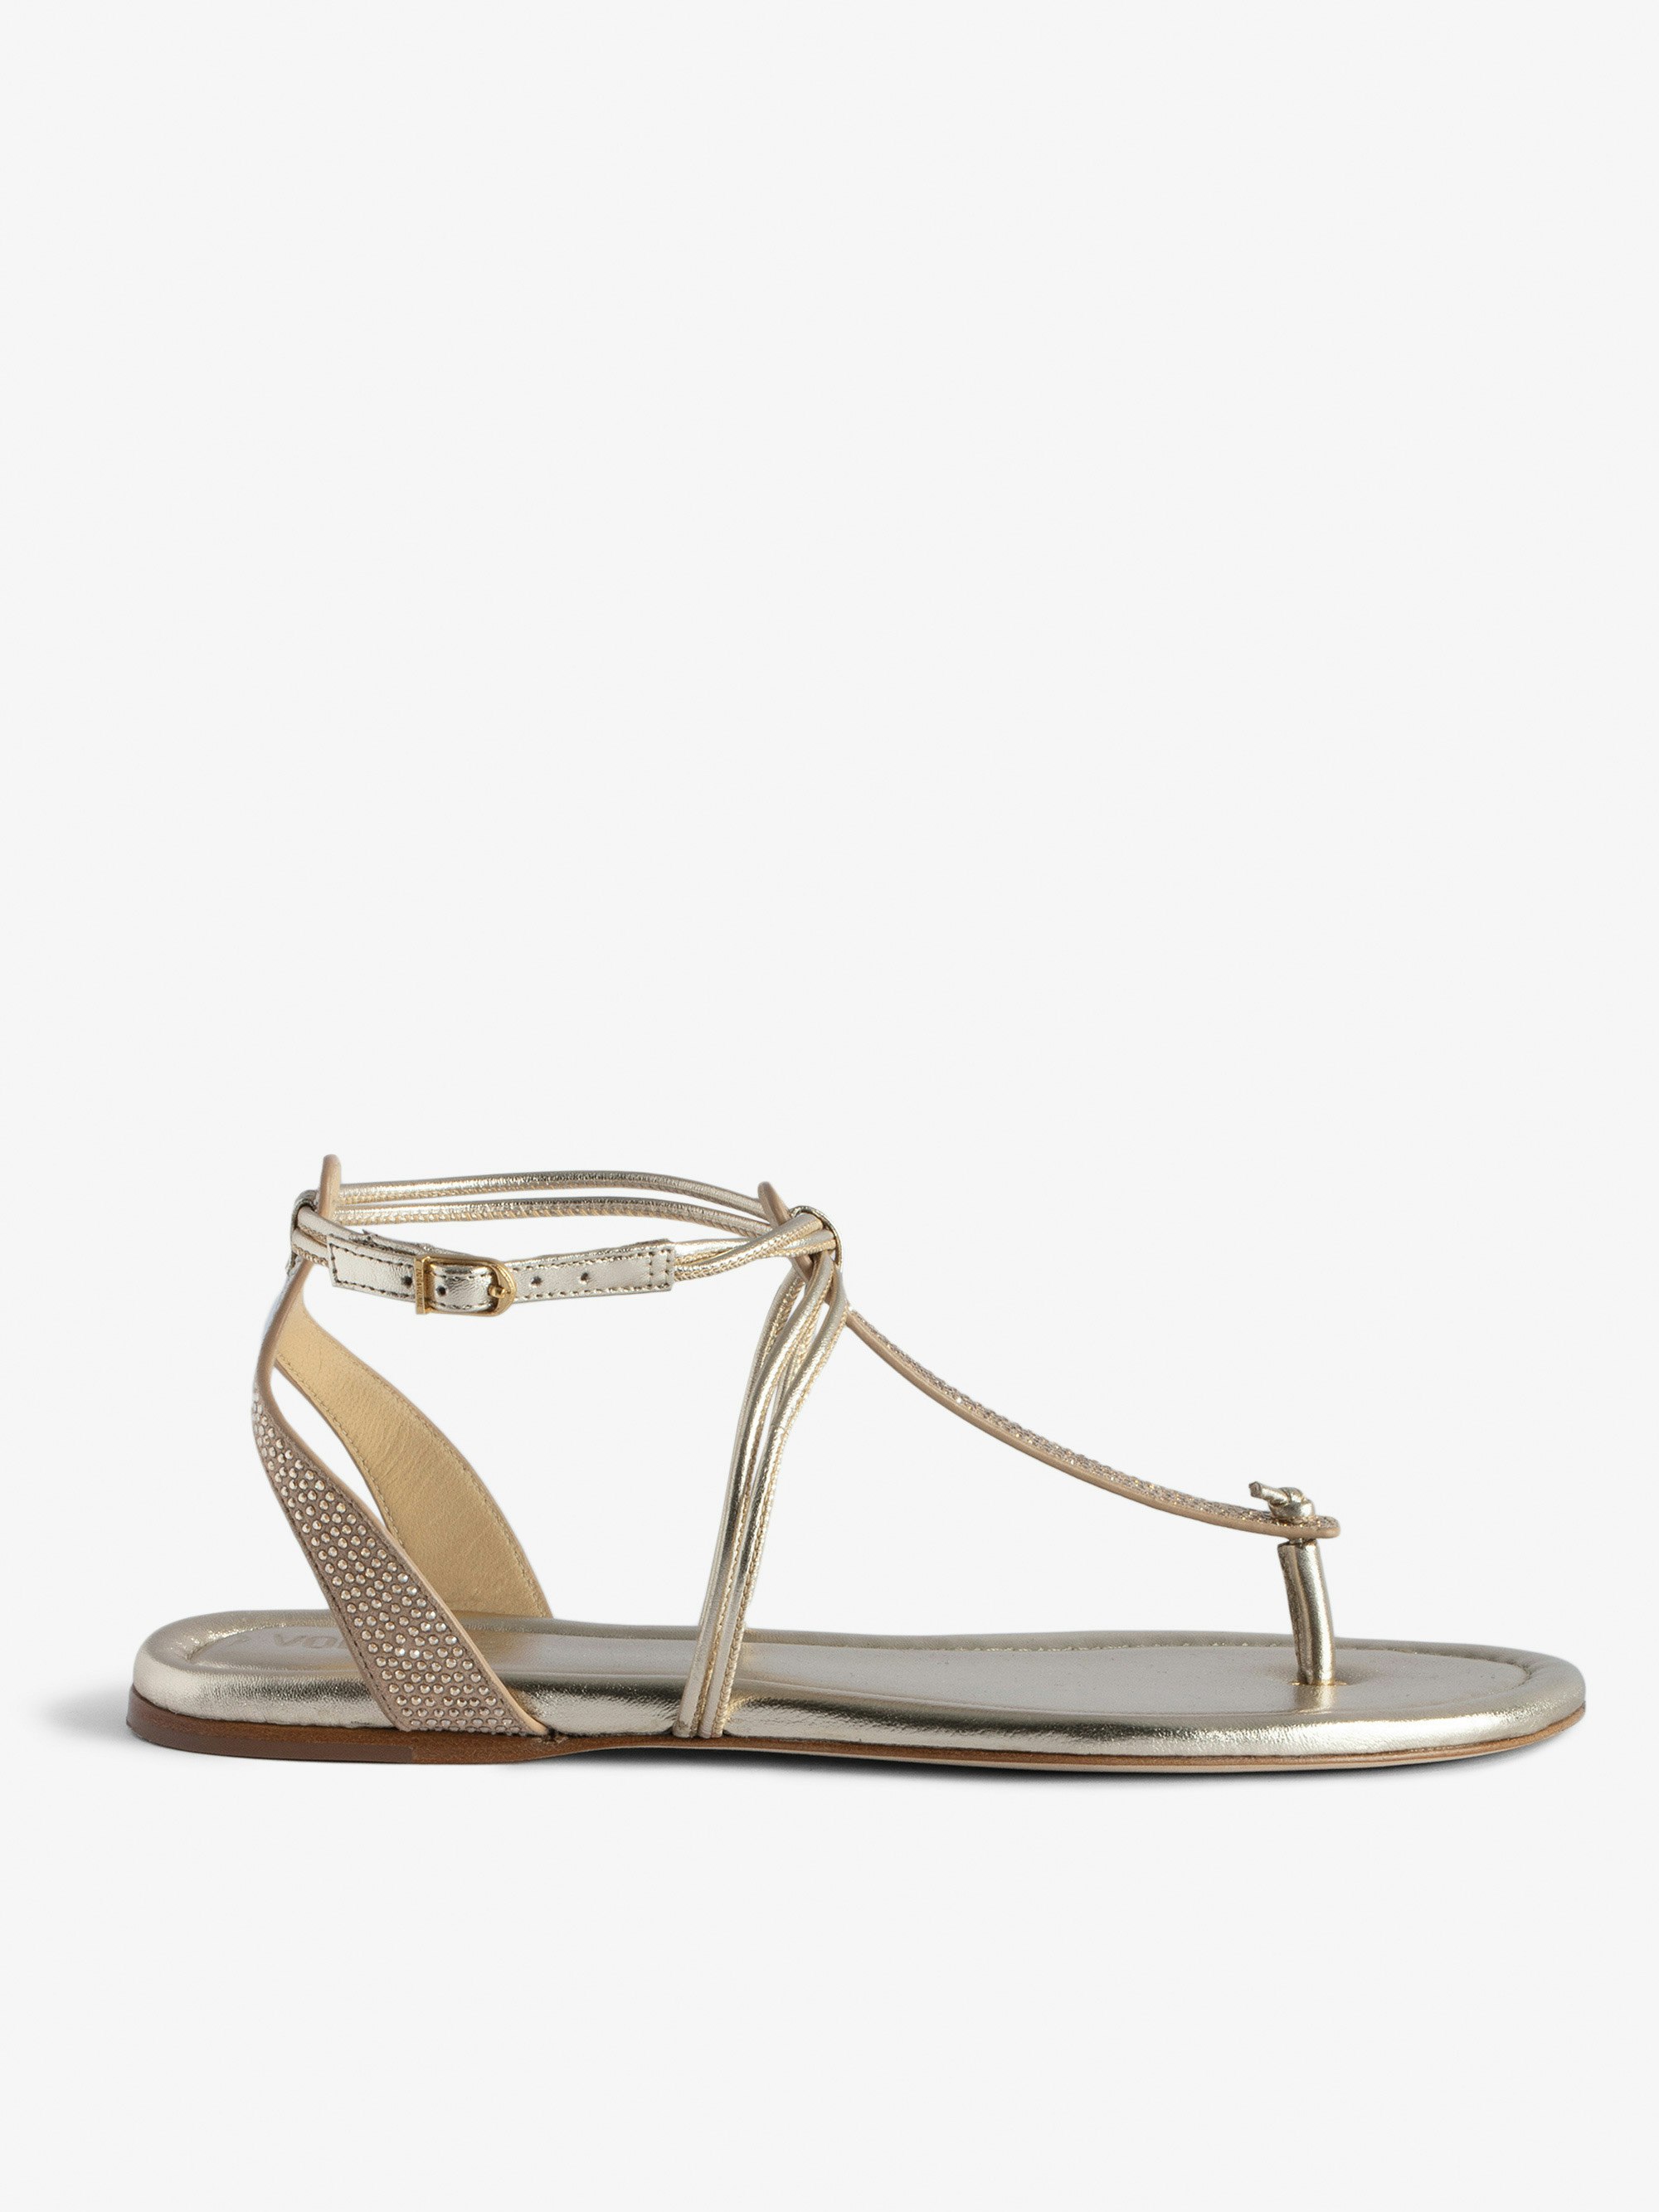 Moonstar Sandals - Vintage-effect gold metallic leather sandals with adjustable buckle and straps with Swarovski® rhinestones.